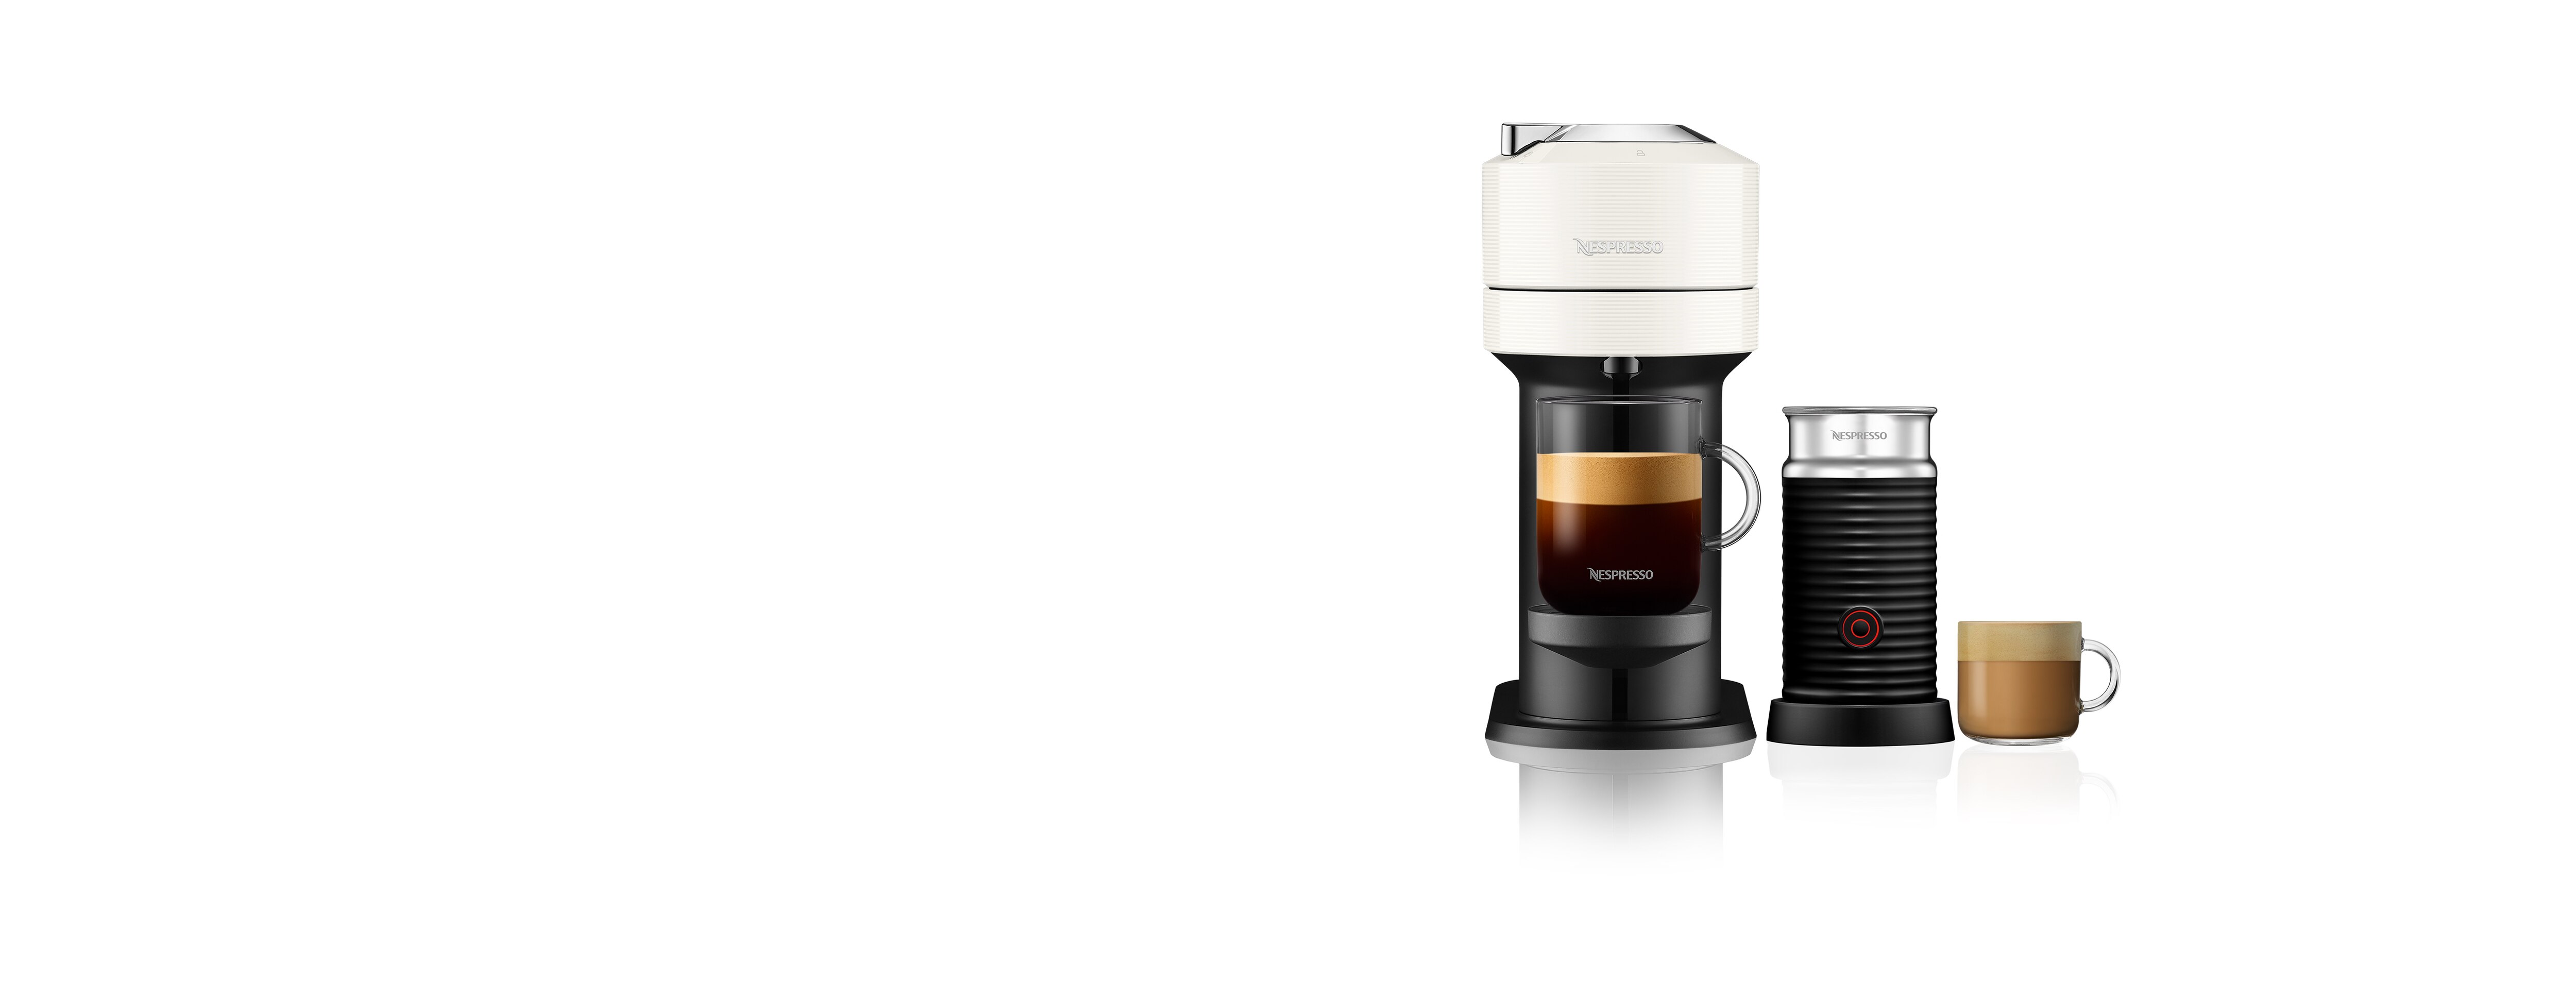 Vertuo Next Coffee Machine and Aeroccino3 Milk Frother